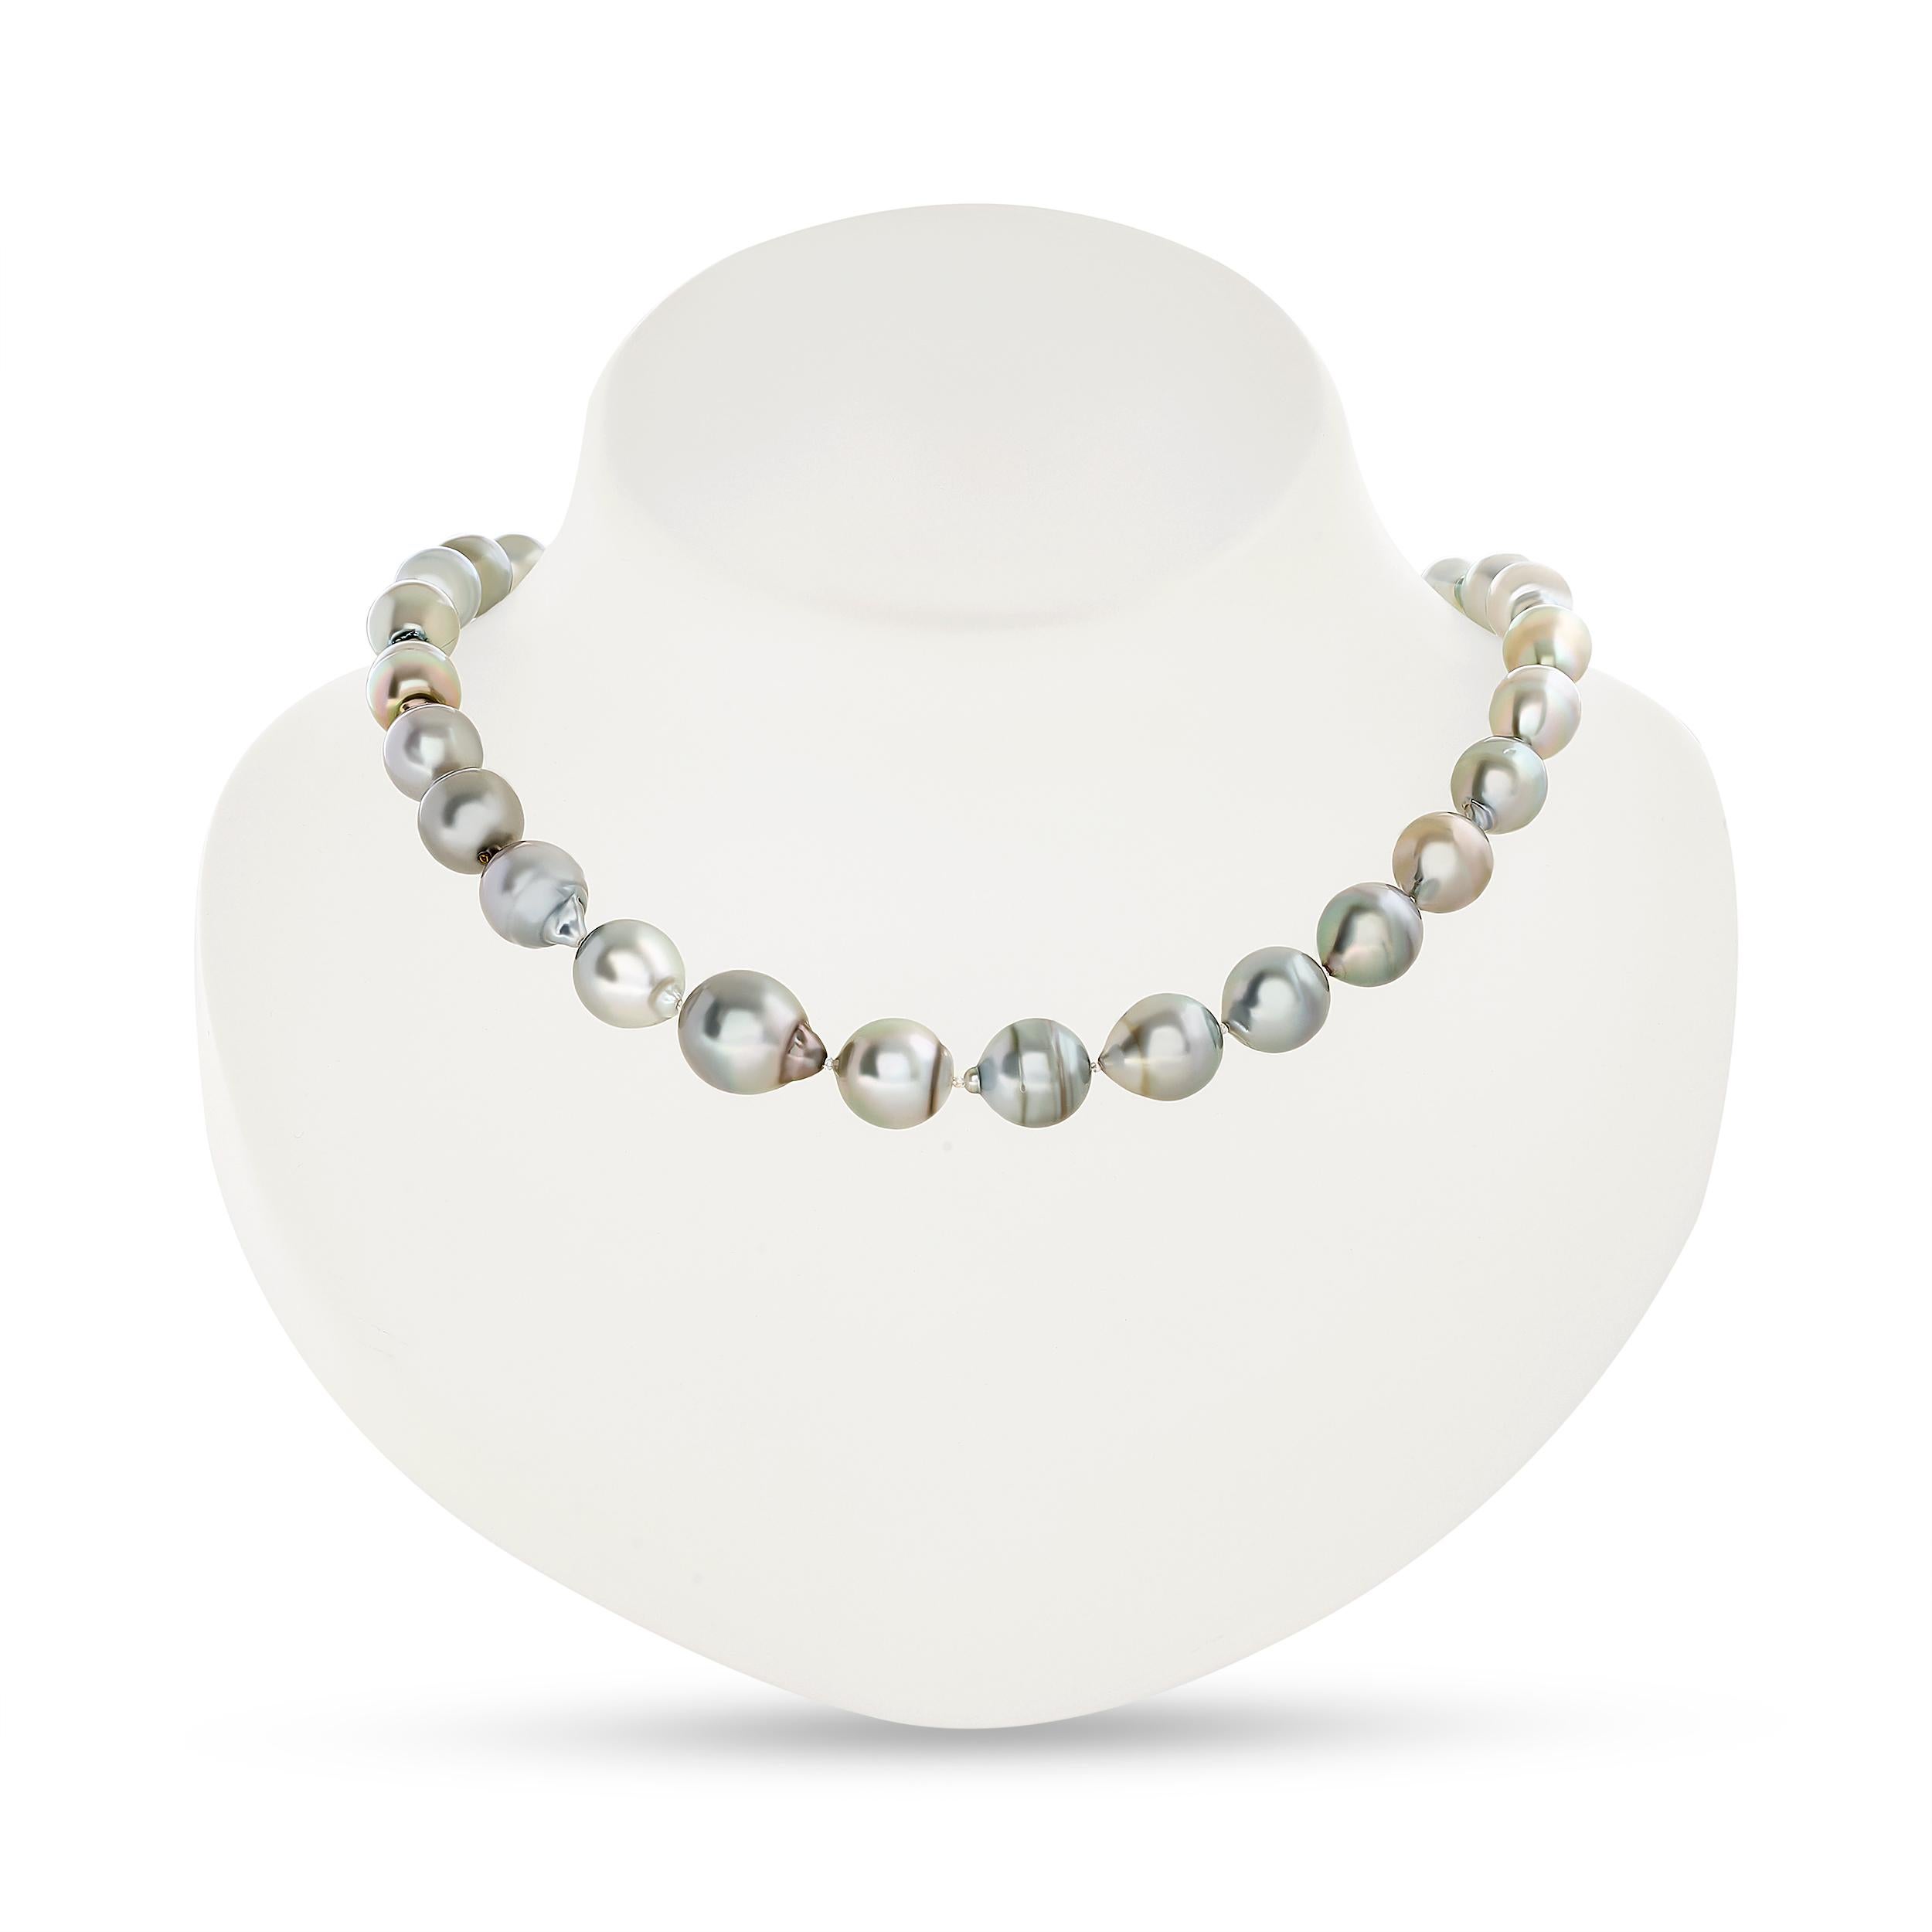 This Laura Munder necklace features lustrous gray pearls with a captivating blue topaz ball catch - in 18 karat white gold.
The 52 round blue topaz weigh approximately 4.25 total carat weight. 

The necklace weighs ~51.62 DWT.

It is stamped 